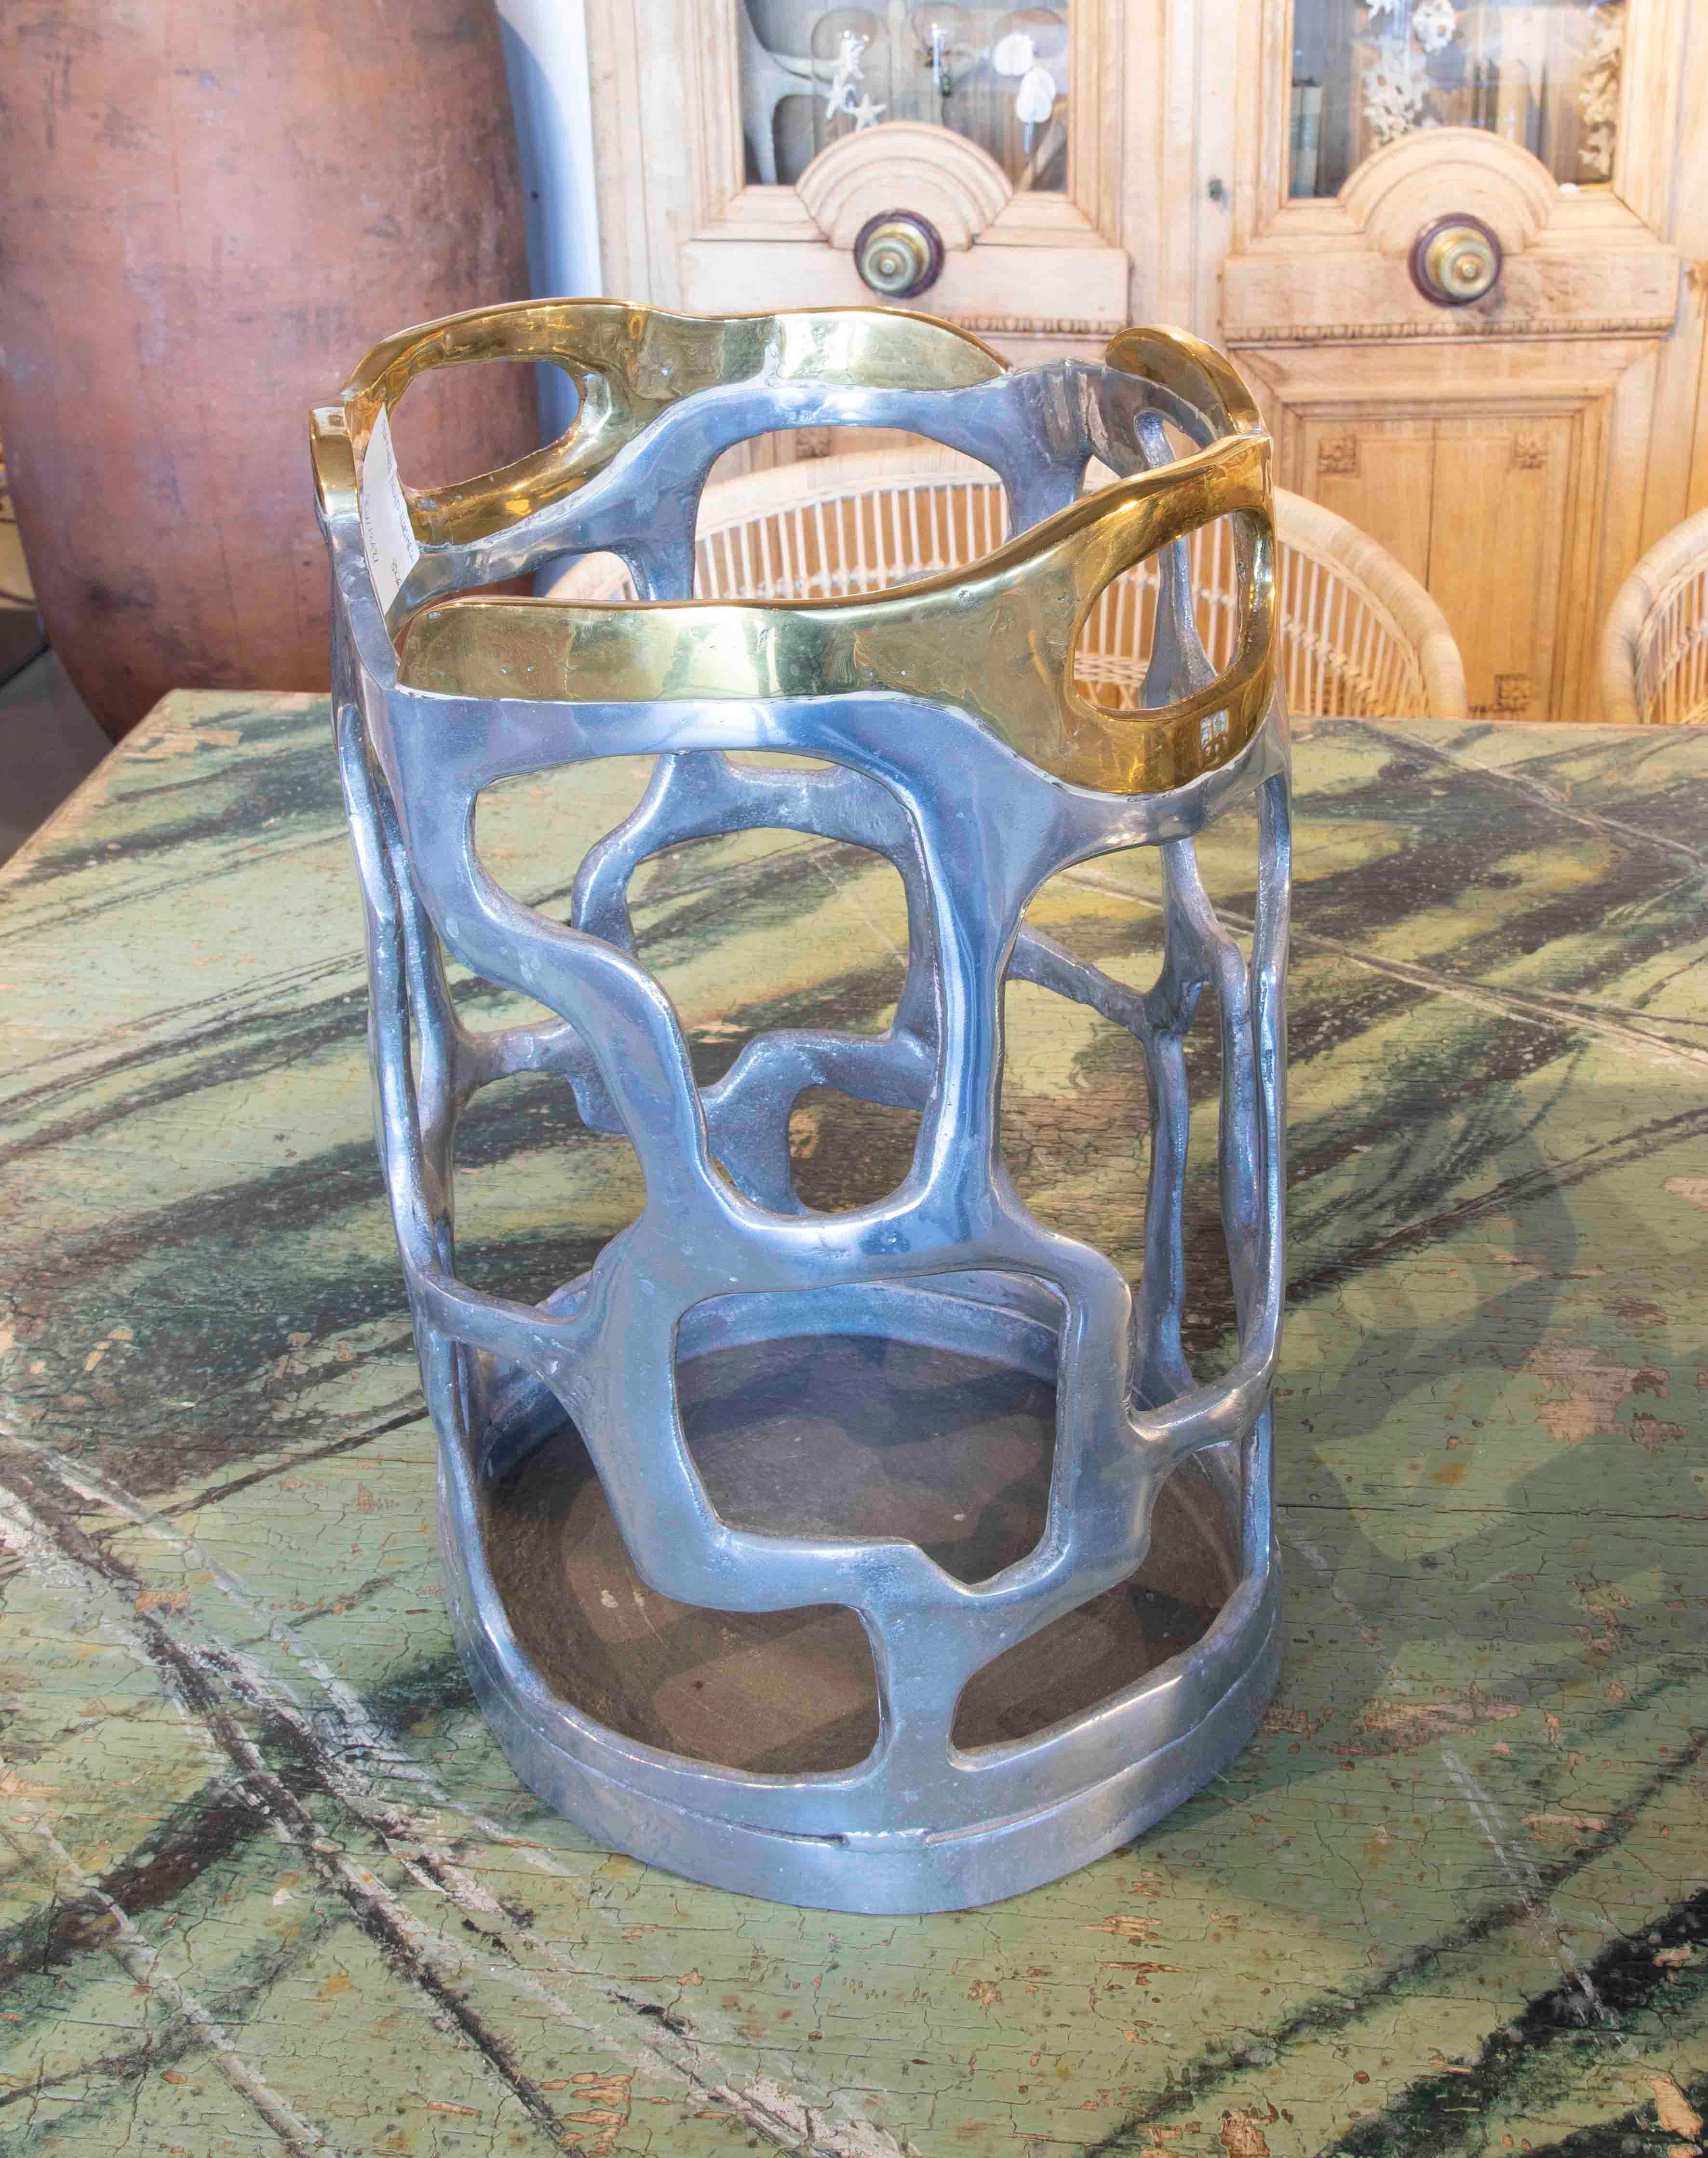 20th Century Bronze Umbrella Stand in Gold and Silver Finish by the Artist David Marshall For Sale